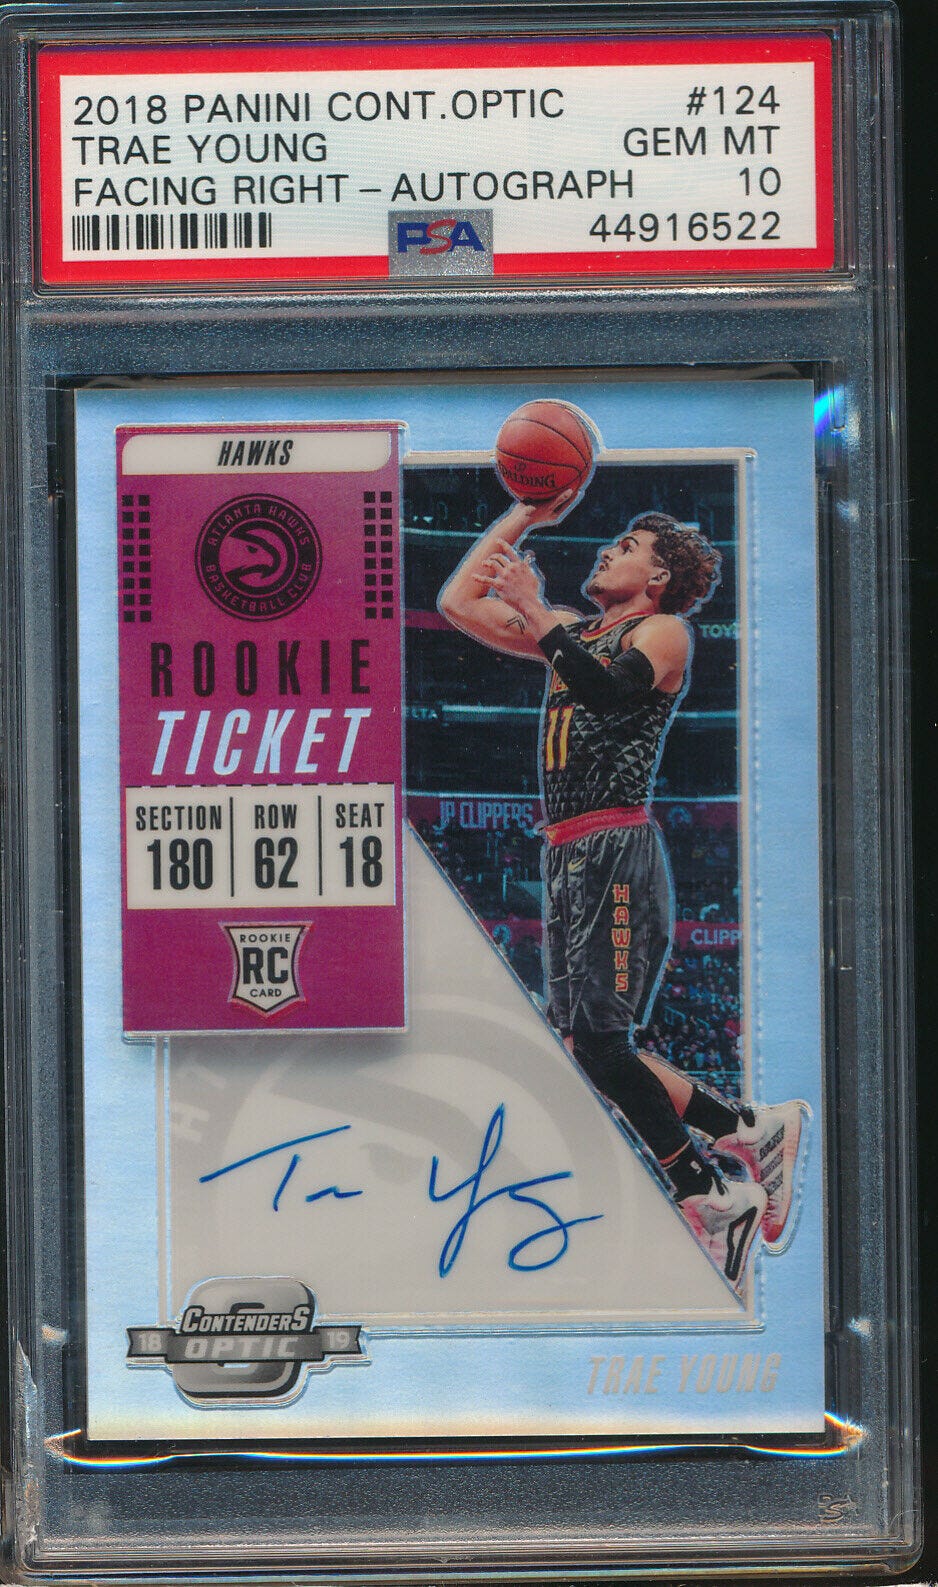 Image 1 - 2018 Contenders Optic Auto #124 Trae Young RC Facing Right PSA 10